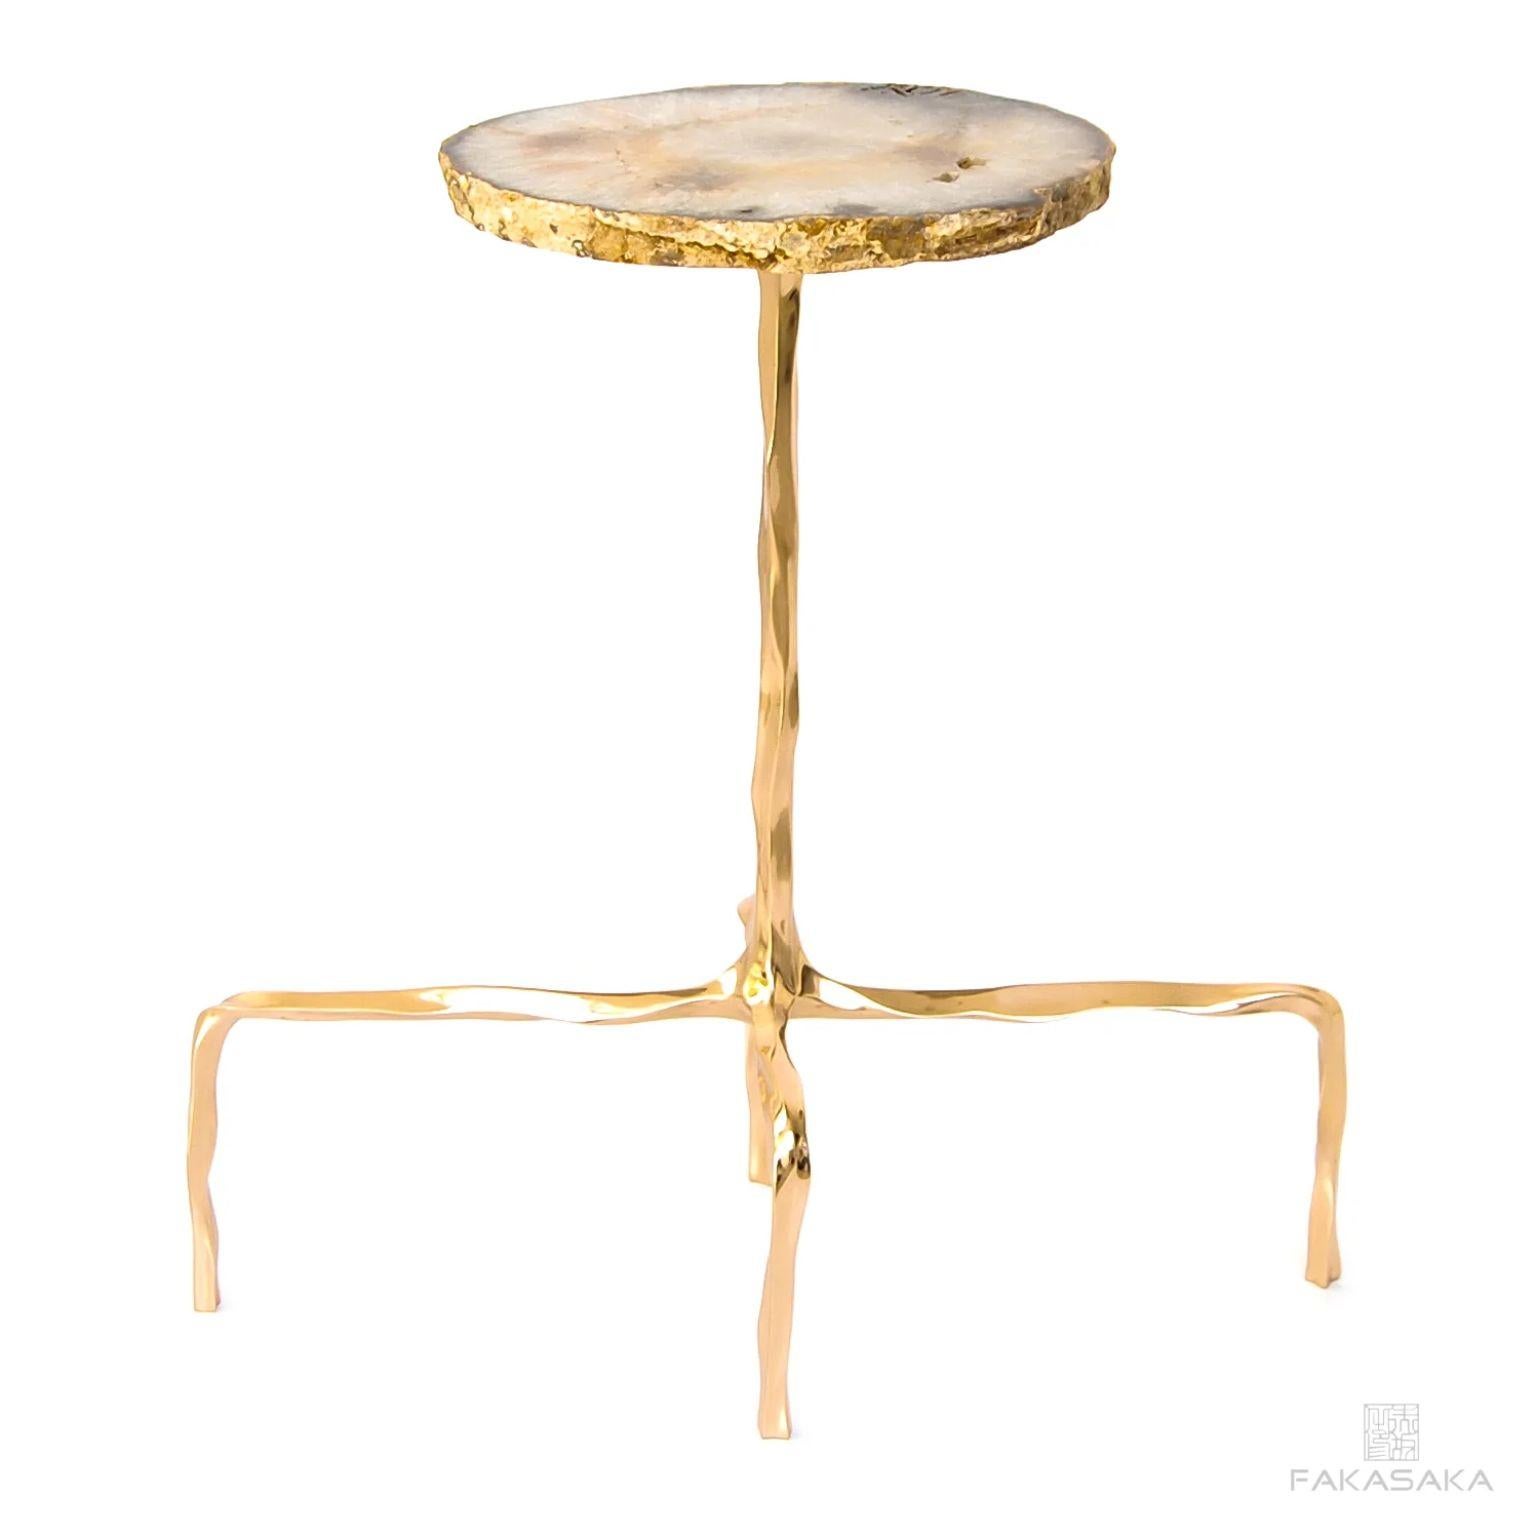 Contemporary Presley Drink Table with Agate Top by Fakasaka Design For Sale